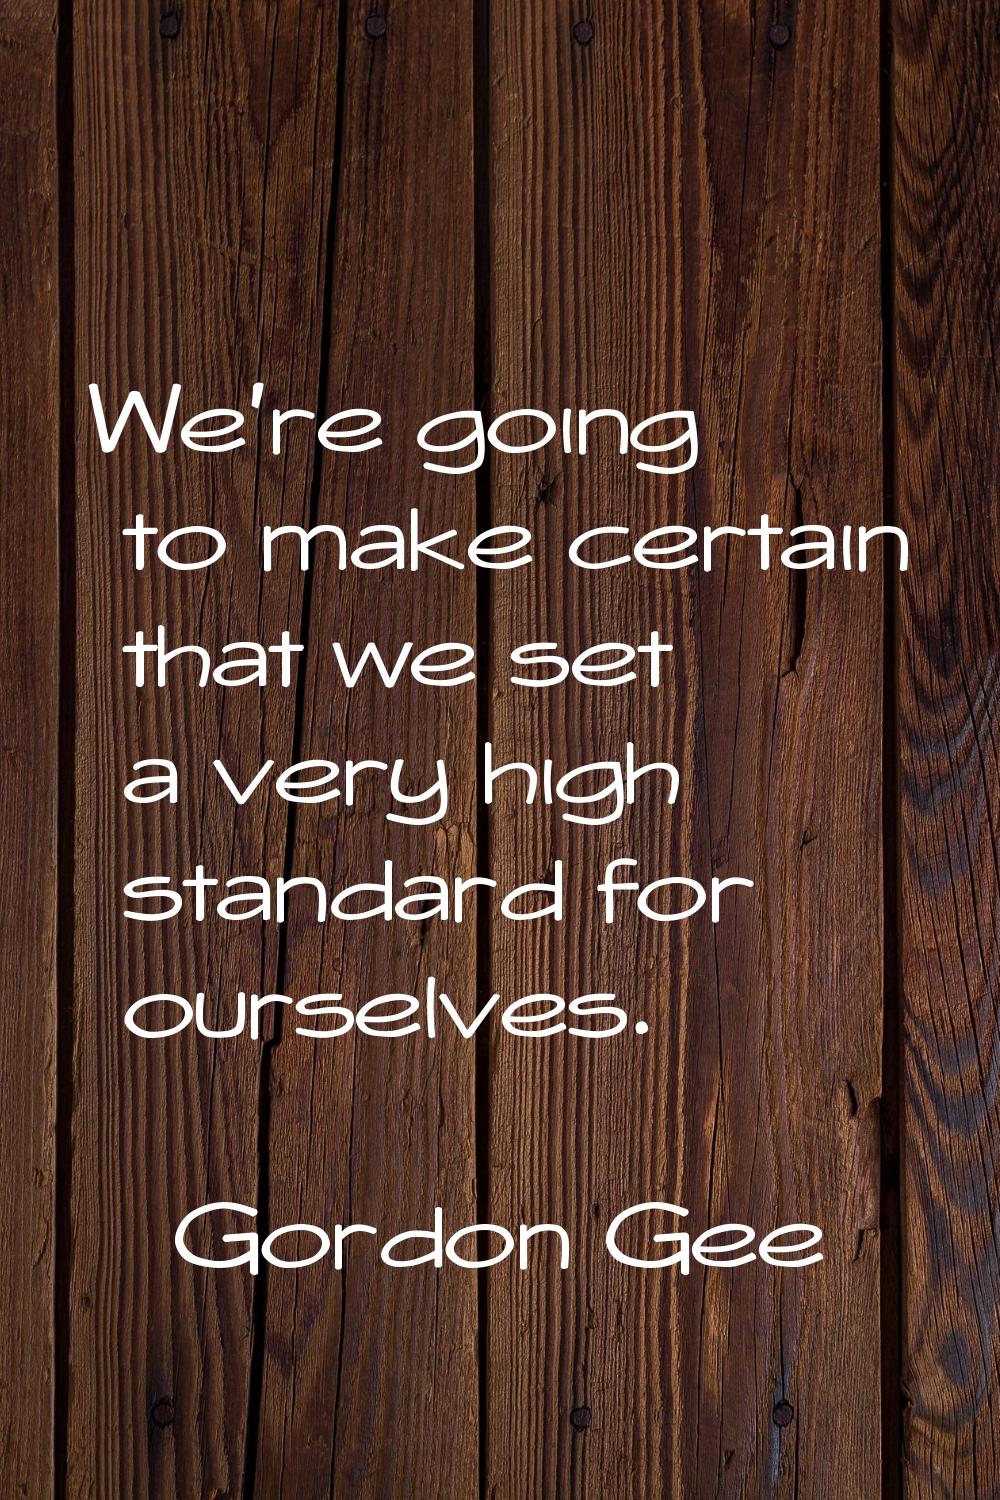 We're going to make certain that we set a very high standard for ourselves.